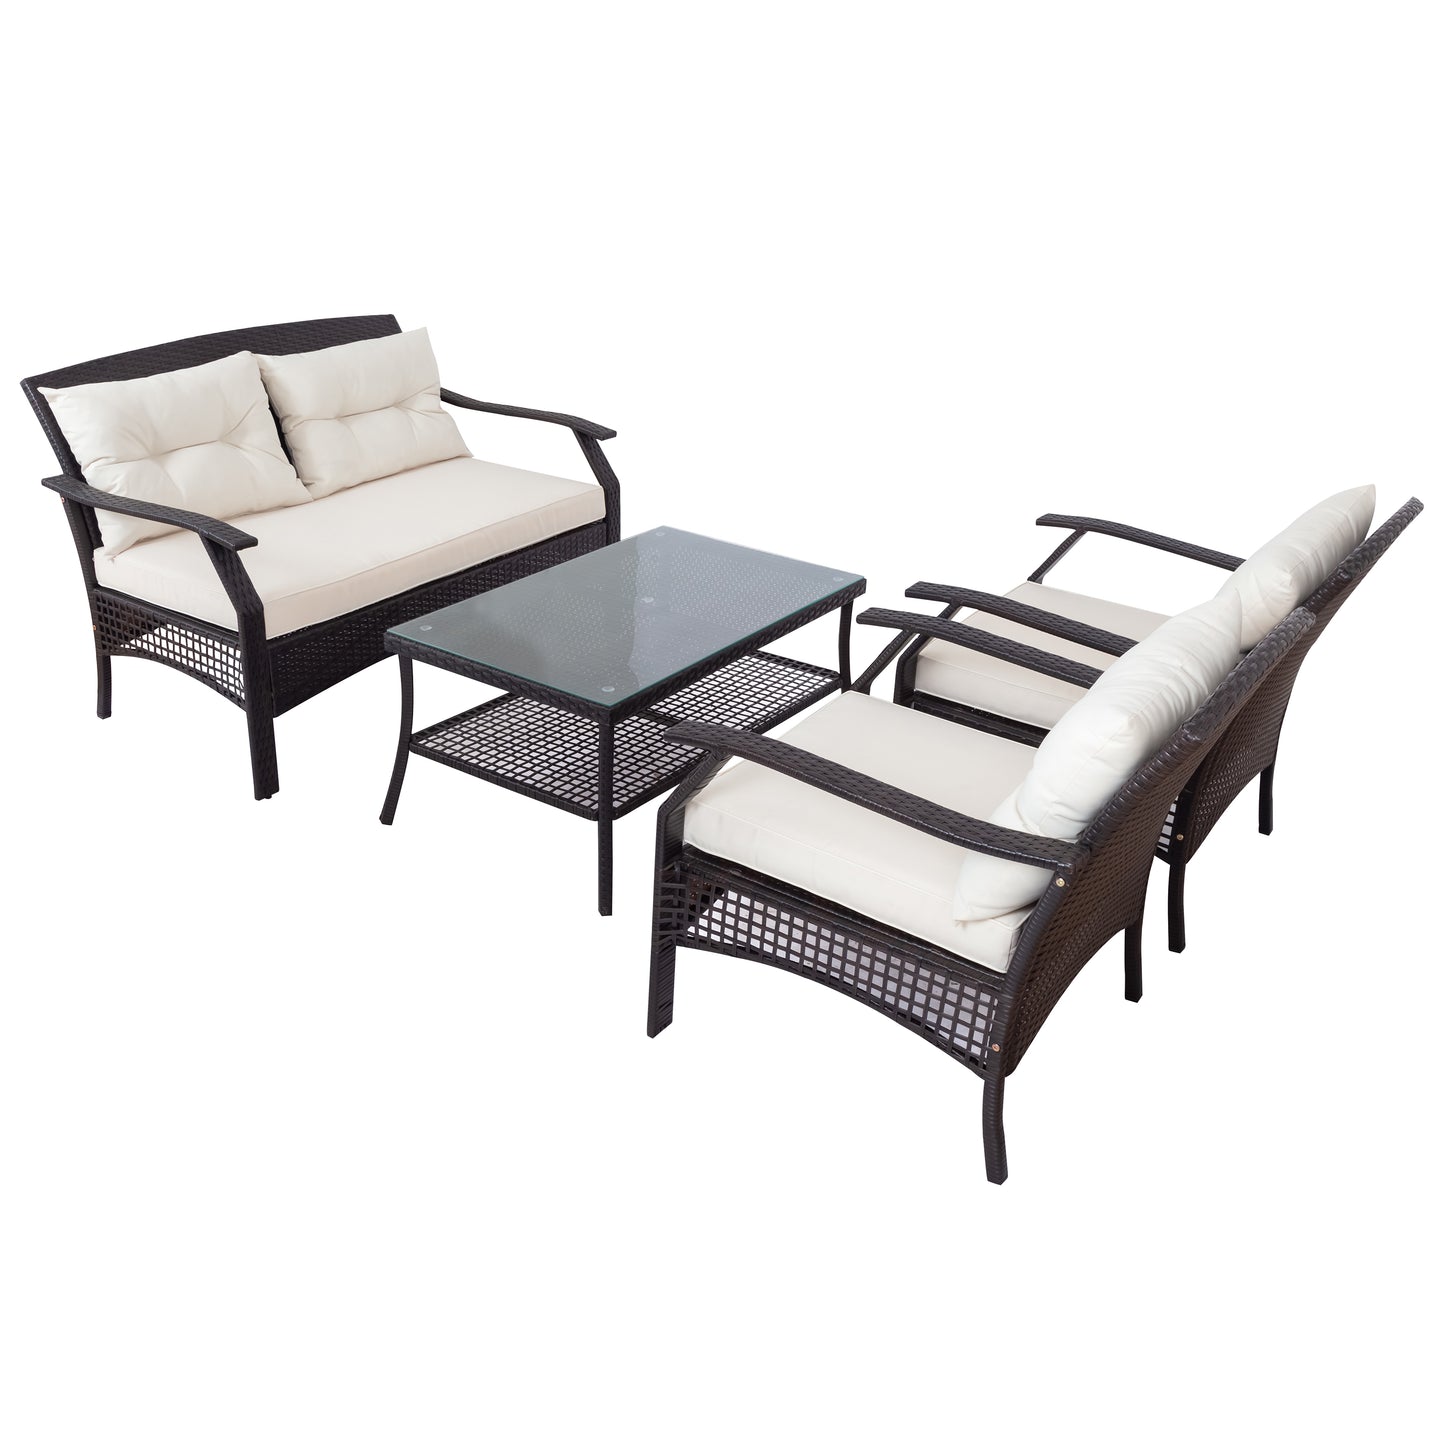 SYNGAR 4 Piece Patio Conversation Sets, Outdoor All Weather Wicker Furniture Sofa Couch Dining Set with Storage Table, Chairs, Loveseat, Cushioned Seats for Garden, Lawn, Backyard, Porch, Beige